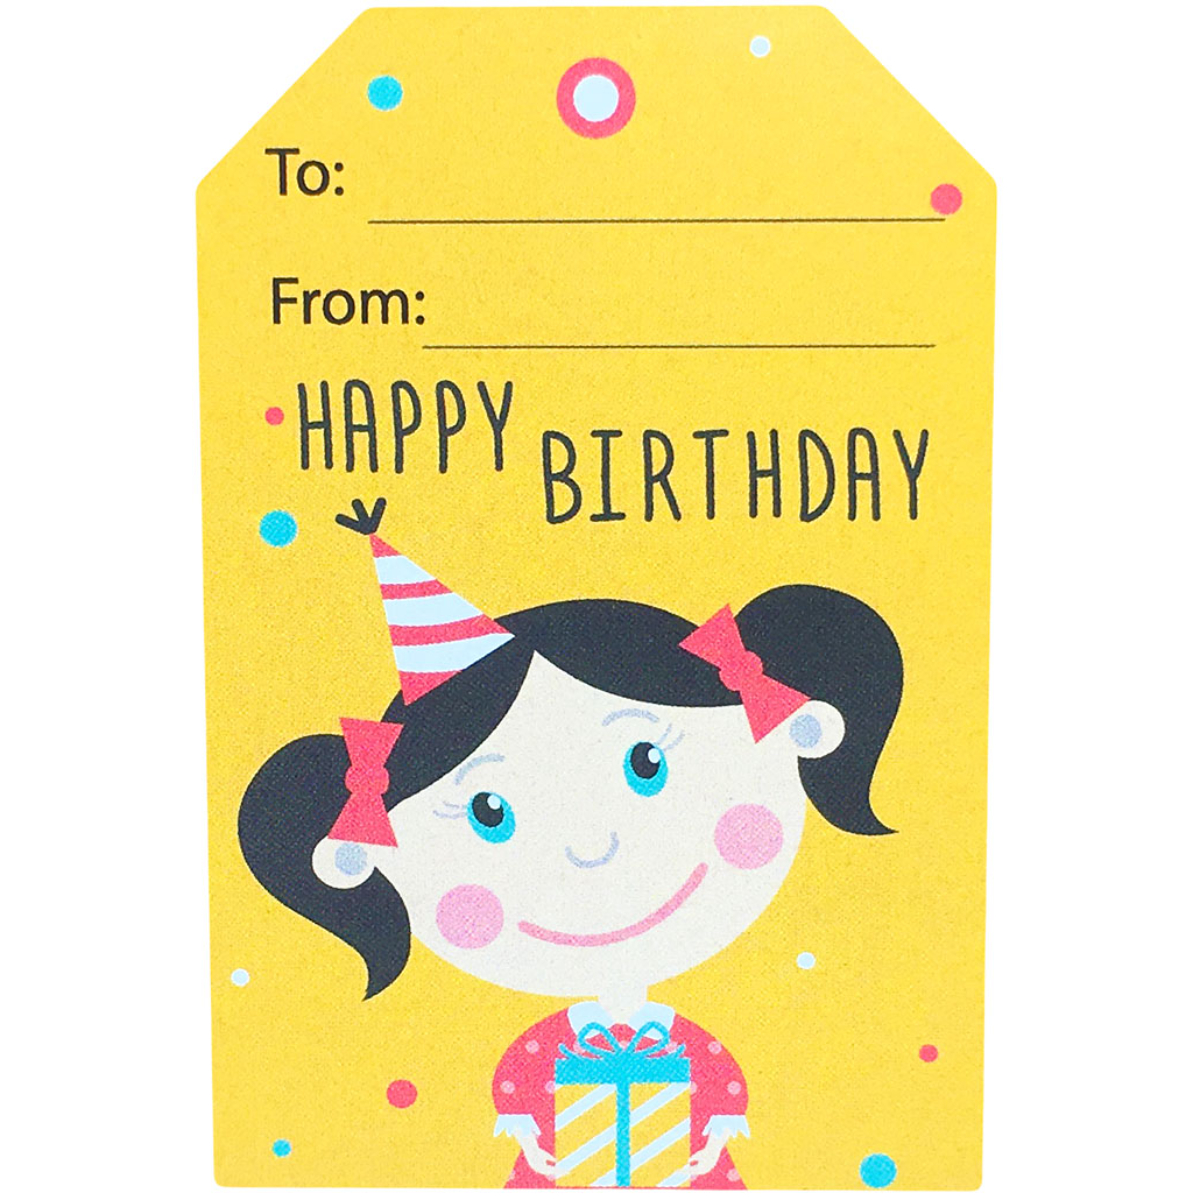 All Occasion Personalized Gift Tags - 3 pack - Tags for Birthday